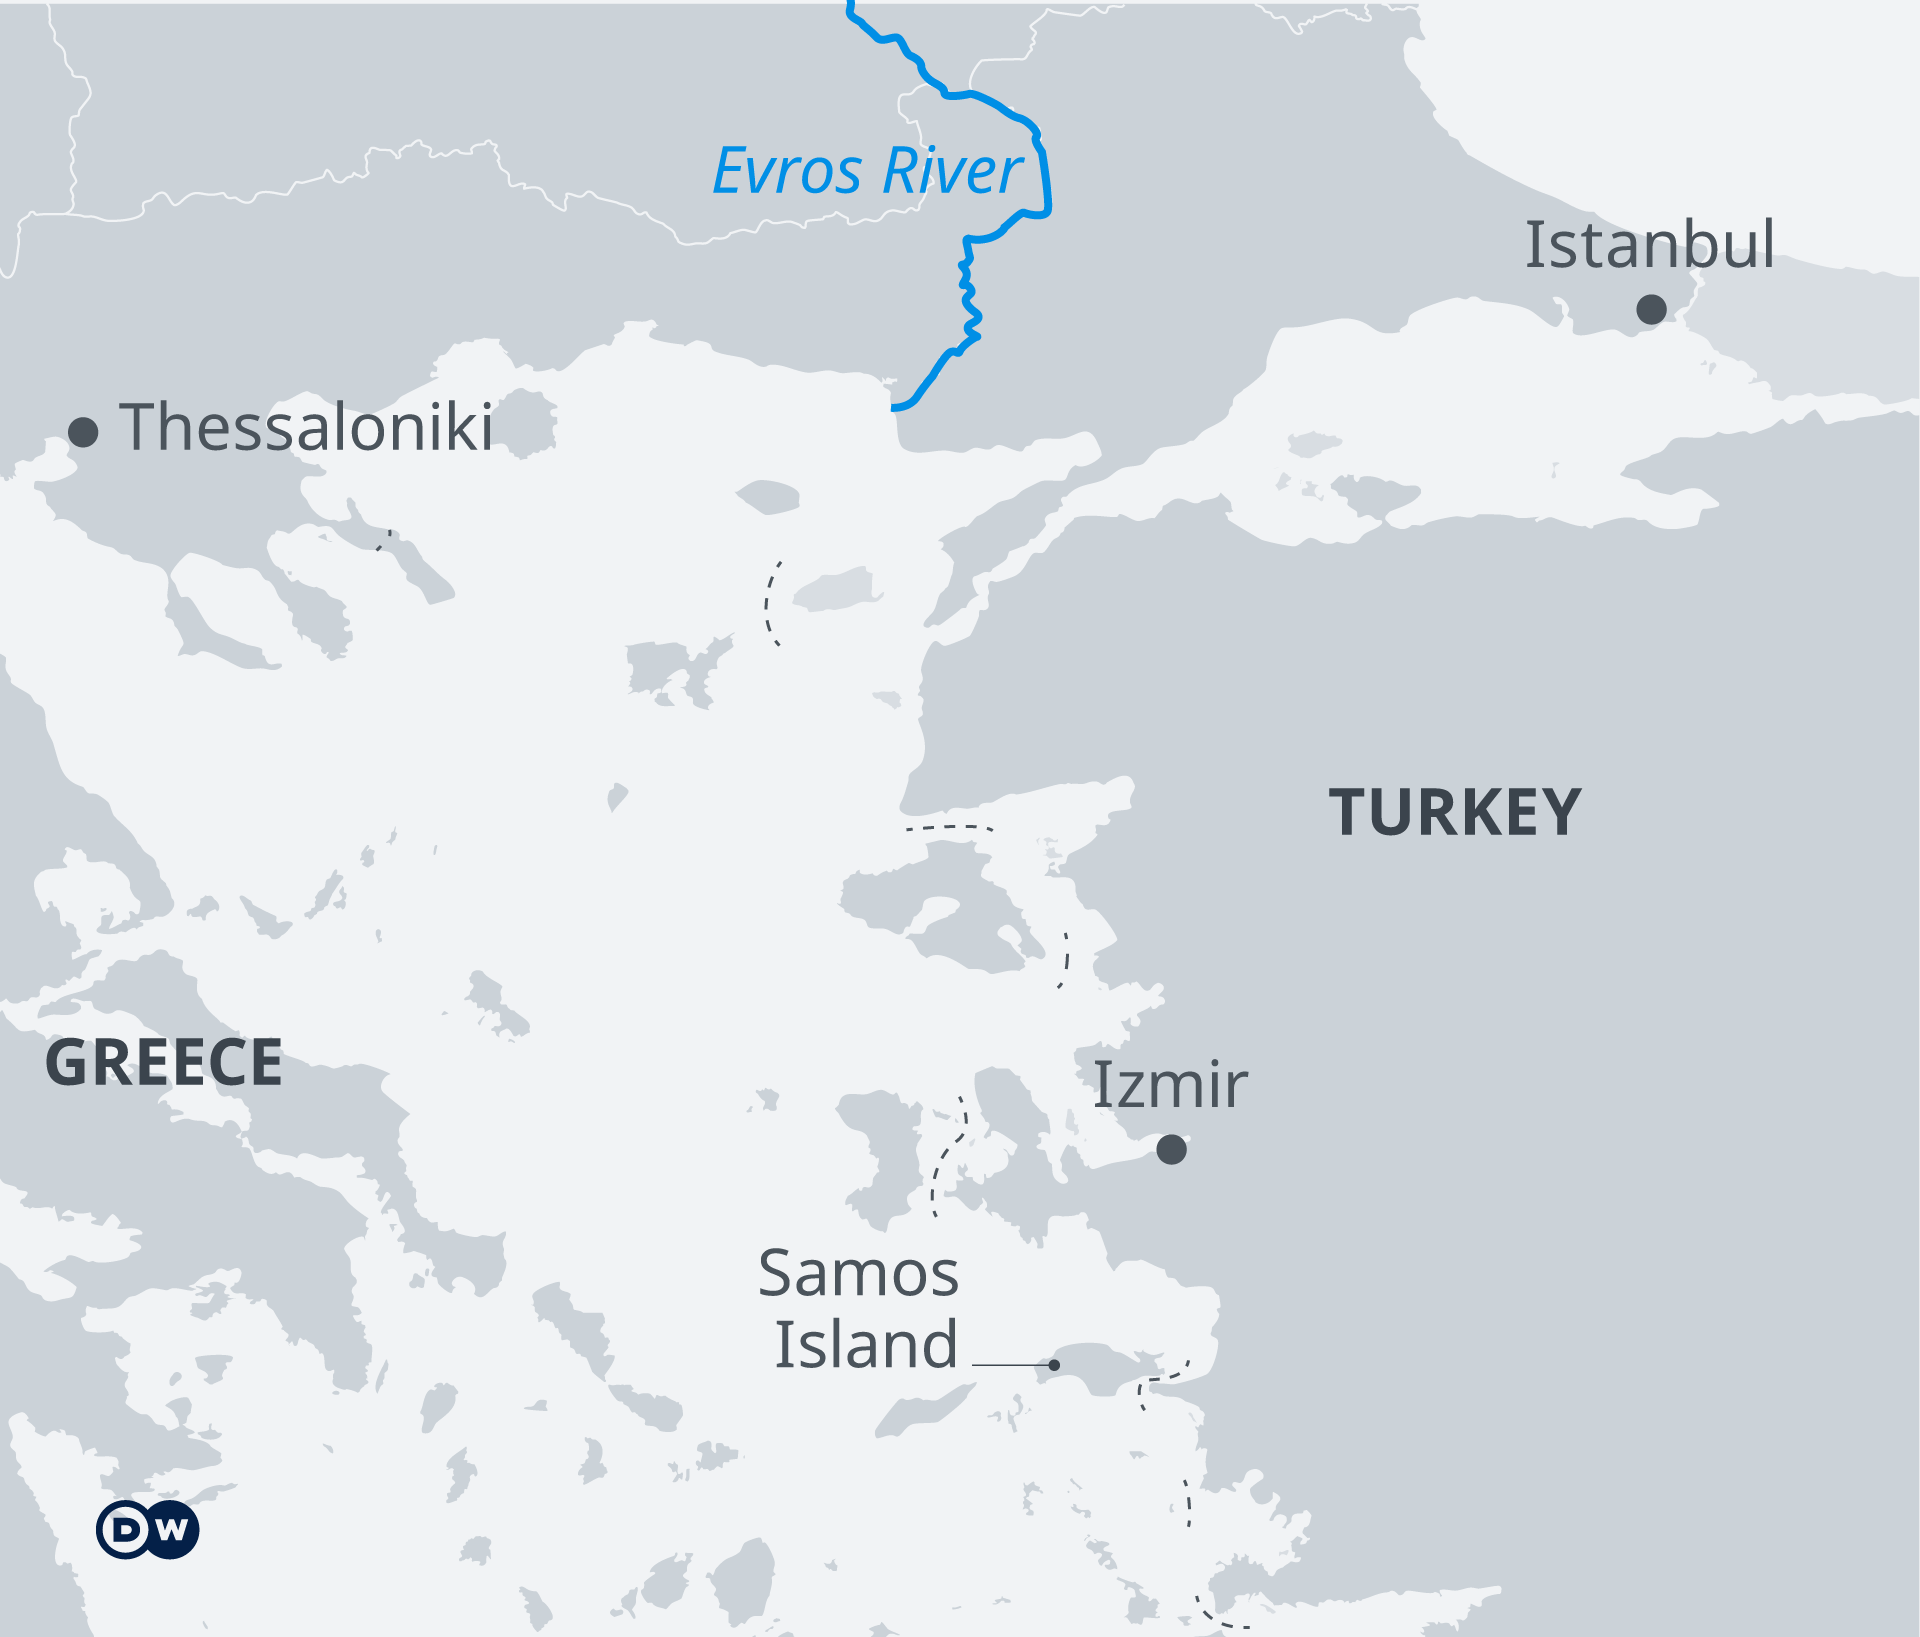 A map showing the border between Turkey and Greece